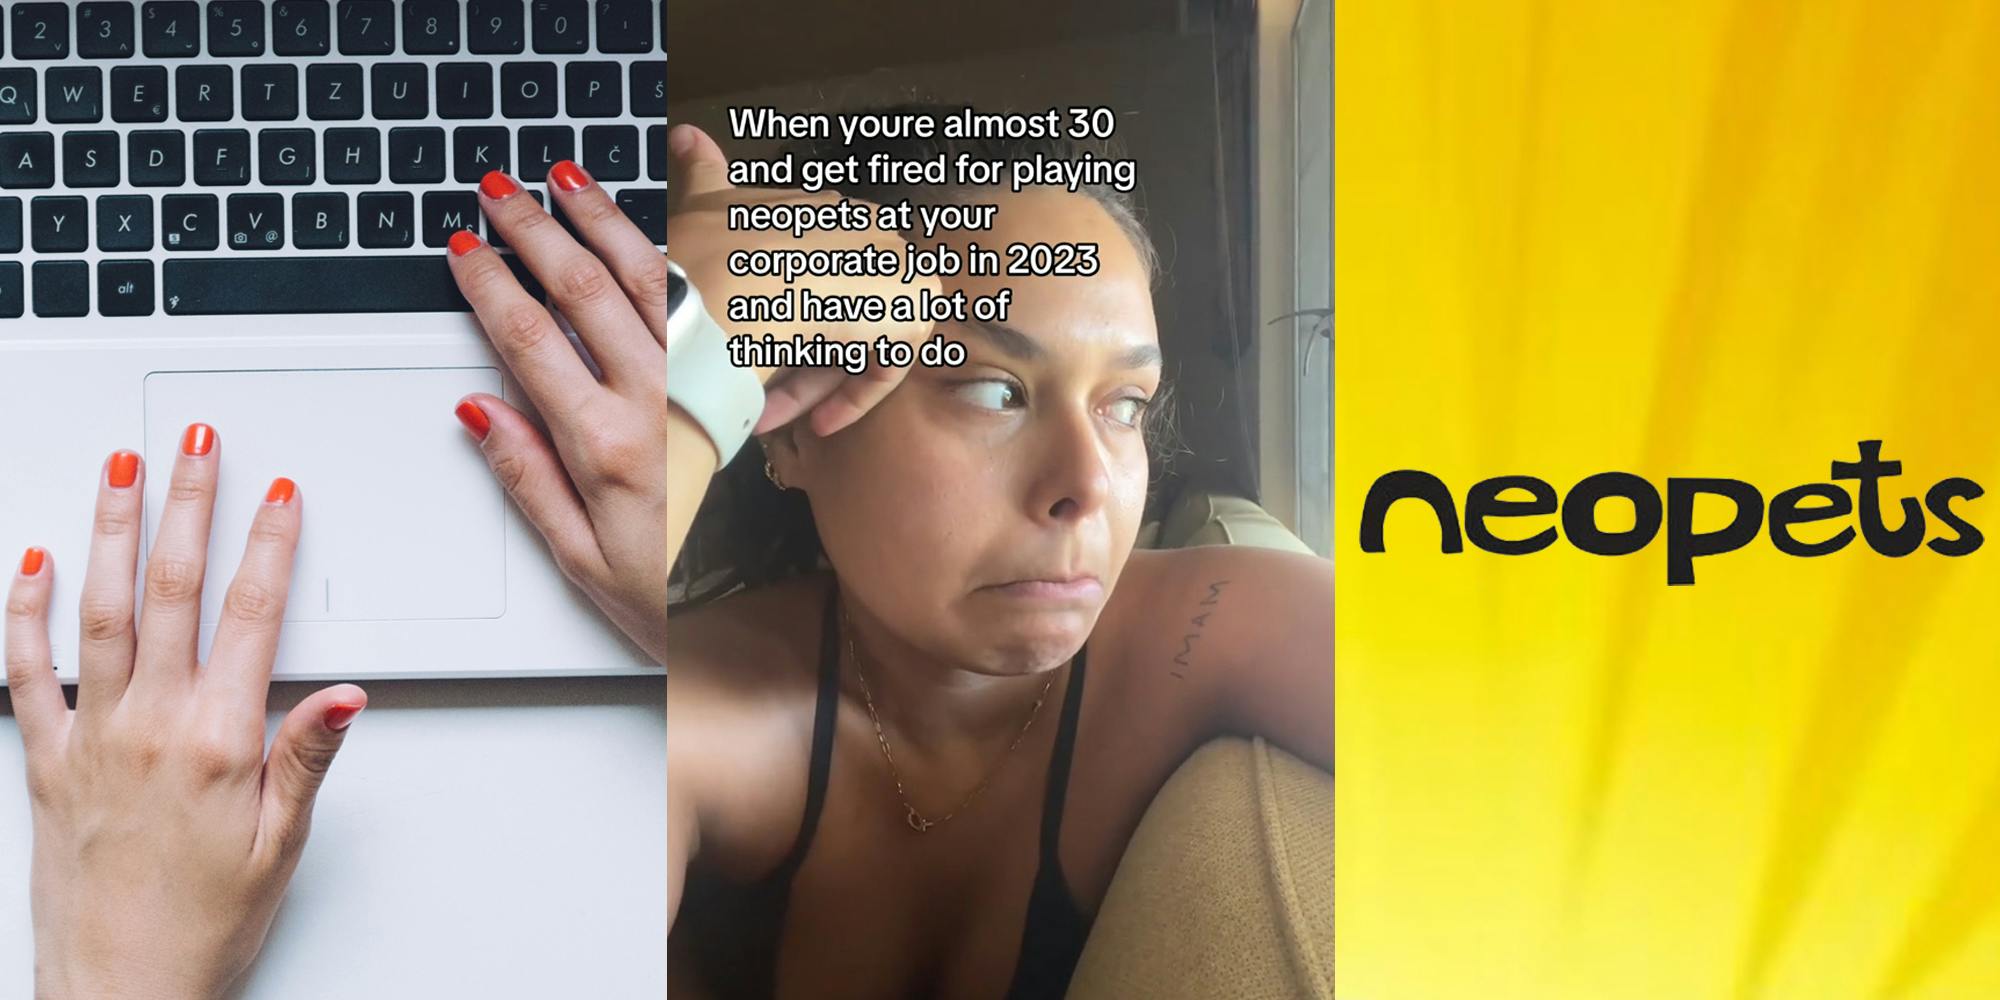 woman hands typing on keyboard (l) office worker with caption "When you're almost 30 and get fired for playing neopets at your corporate job in 2013 and have a lot of thinking to do" (c) Neopets logo in front of yellow and orange background (r)